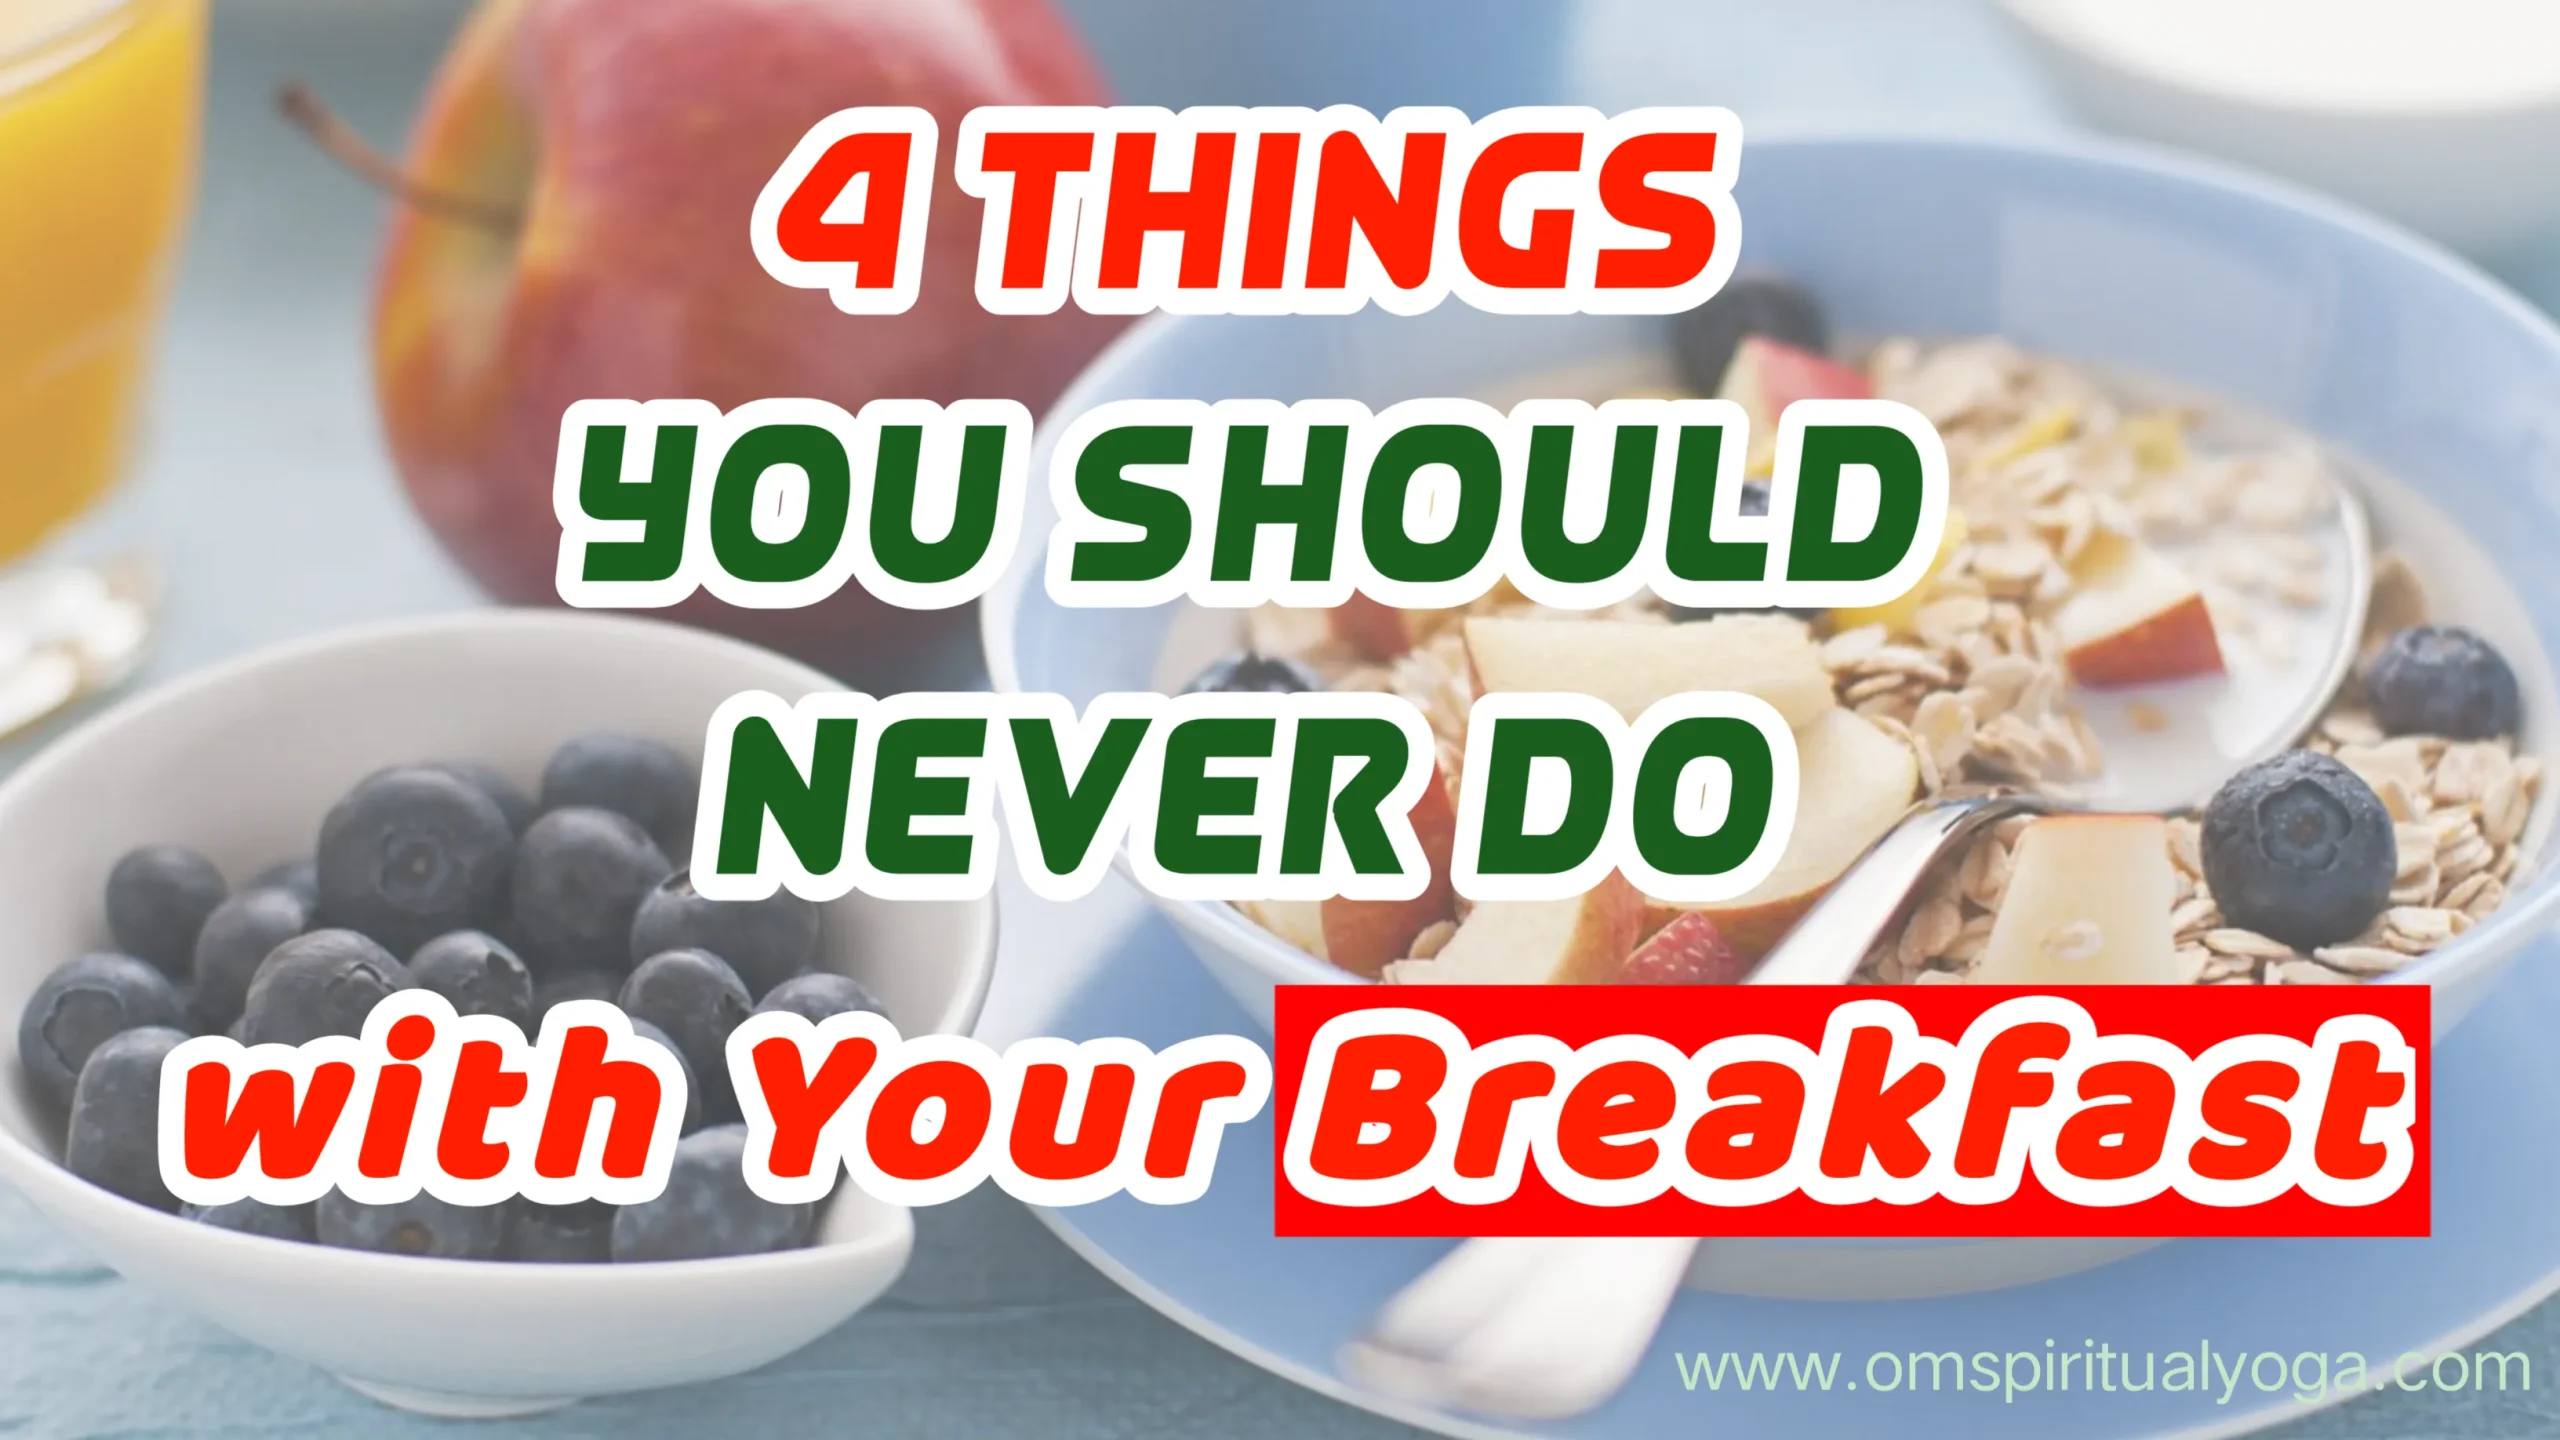 4 Things You Should Never Do With Your Breakfast